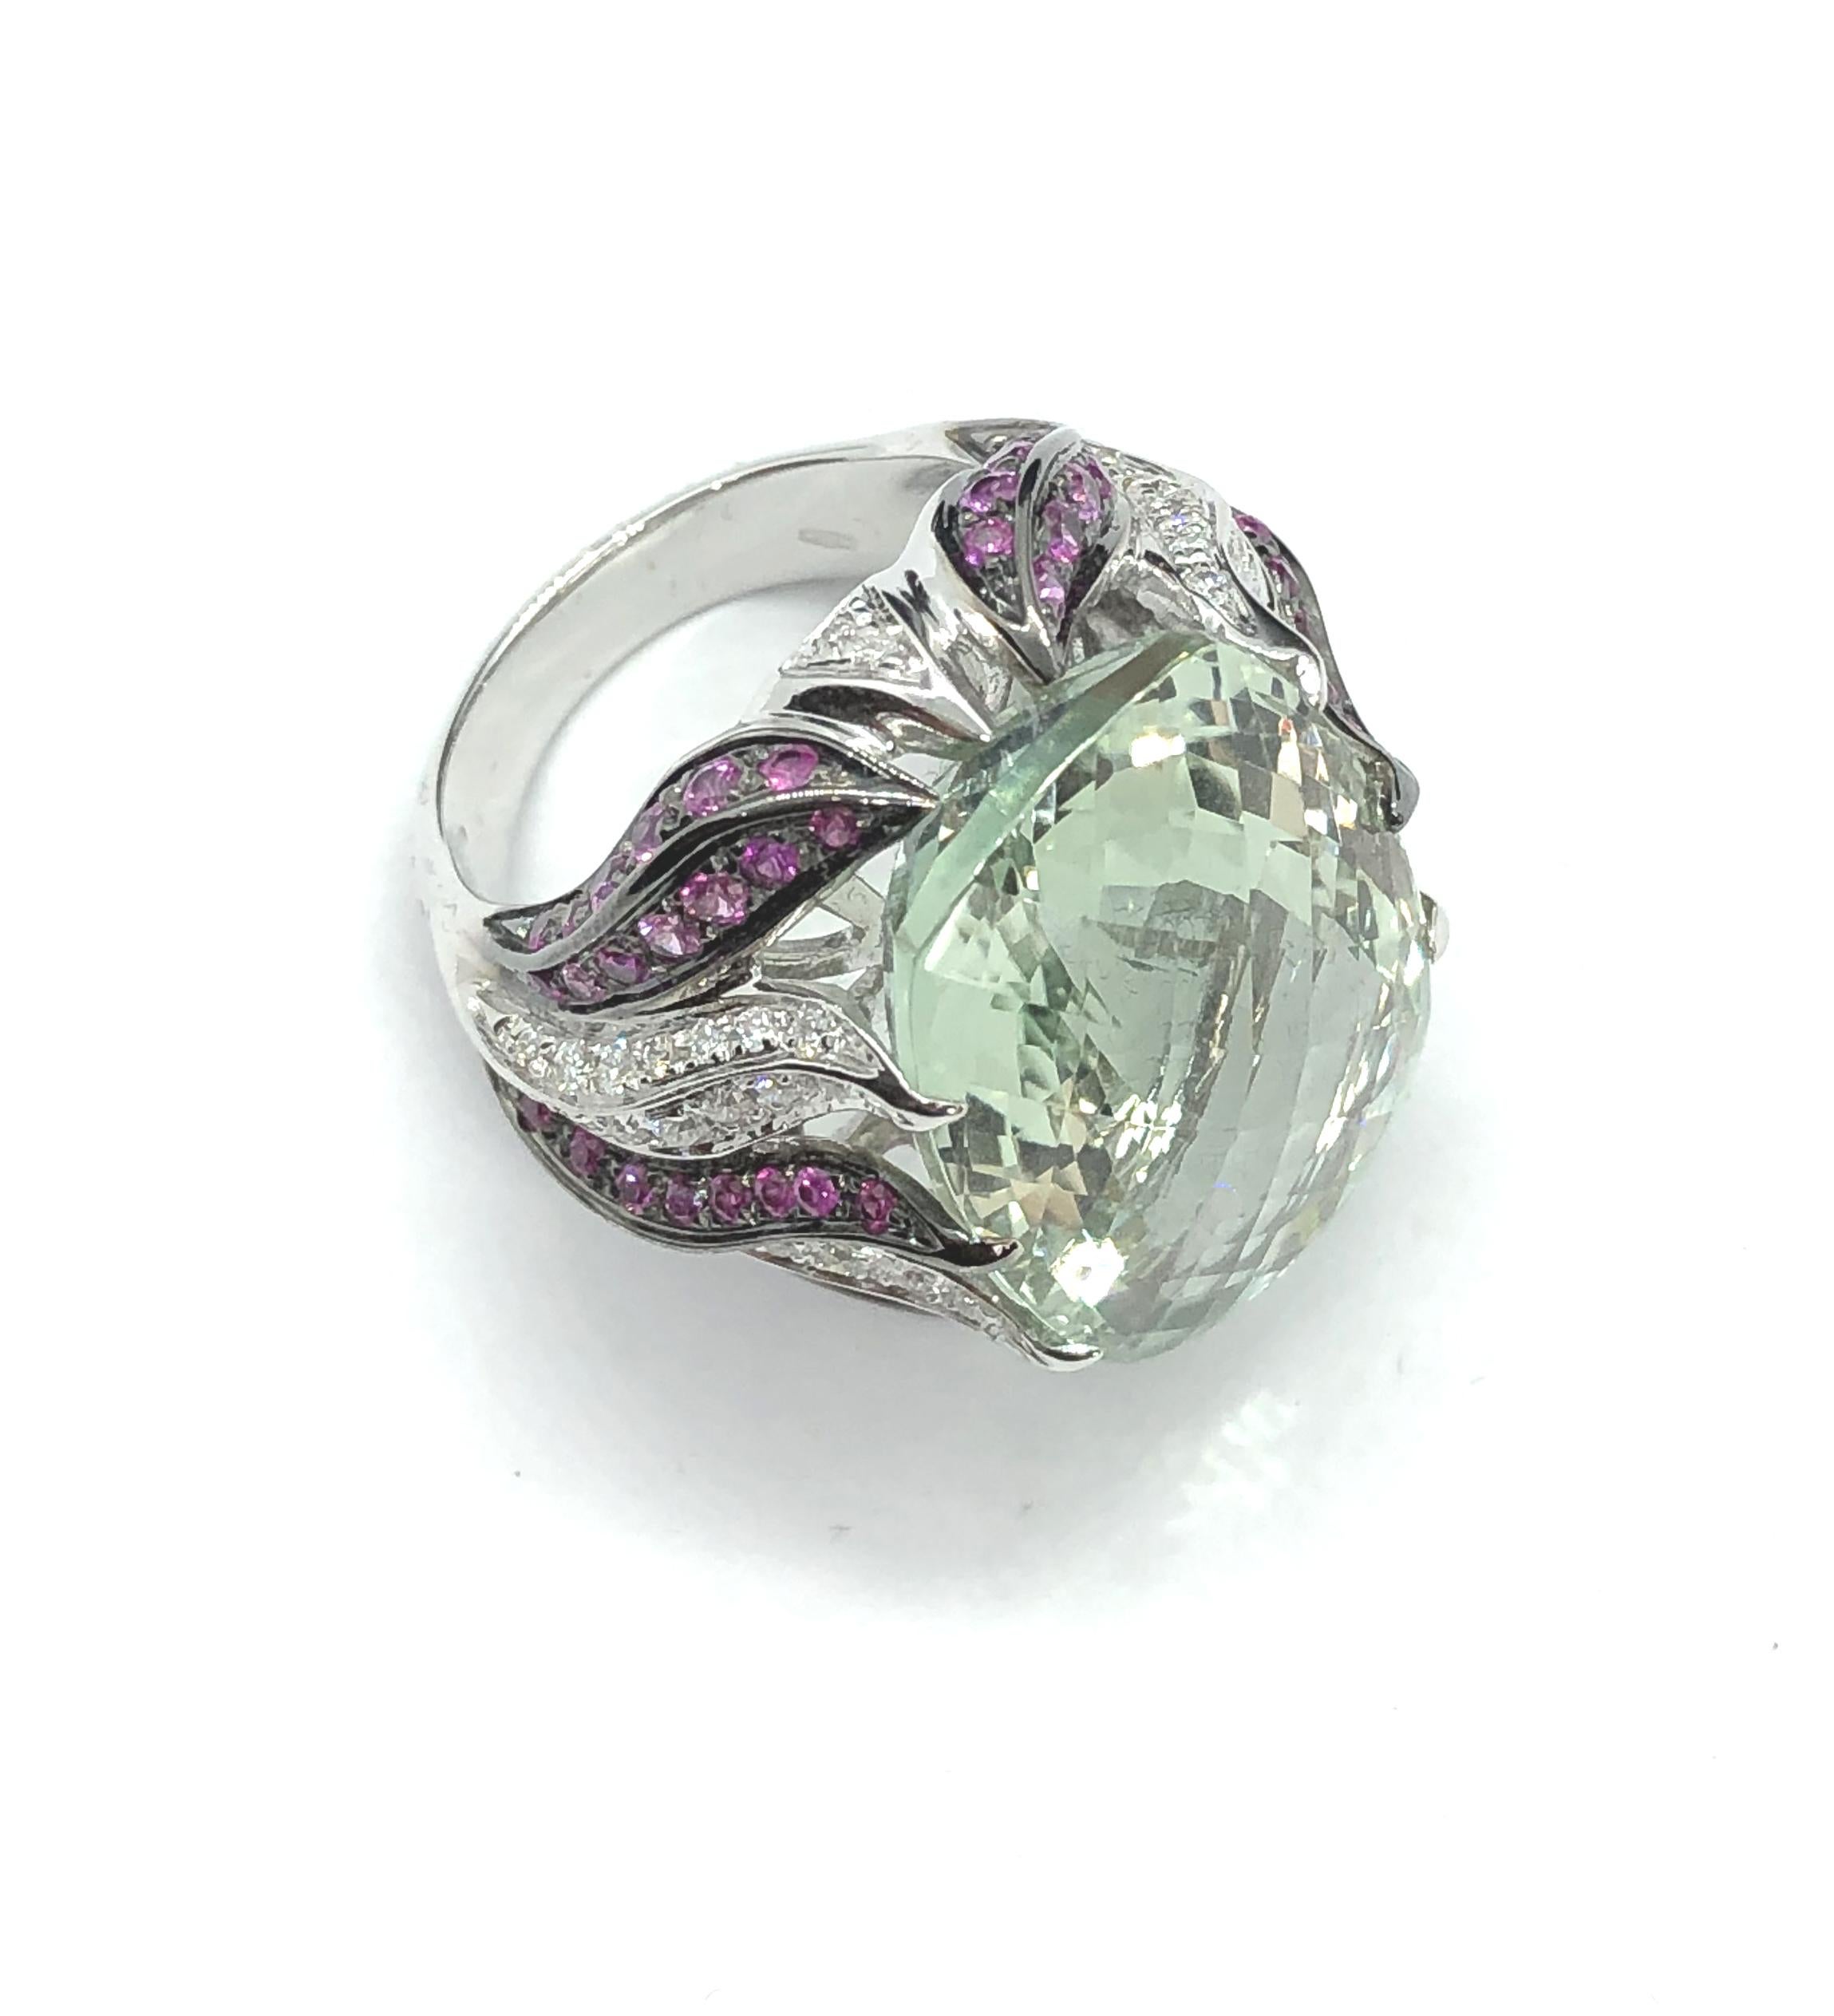 23 Ct Green Prasiolite White Gold Cocktail Ring Diamond and Pink Sapphires Flame For Sale 8